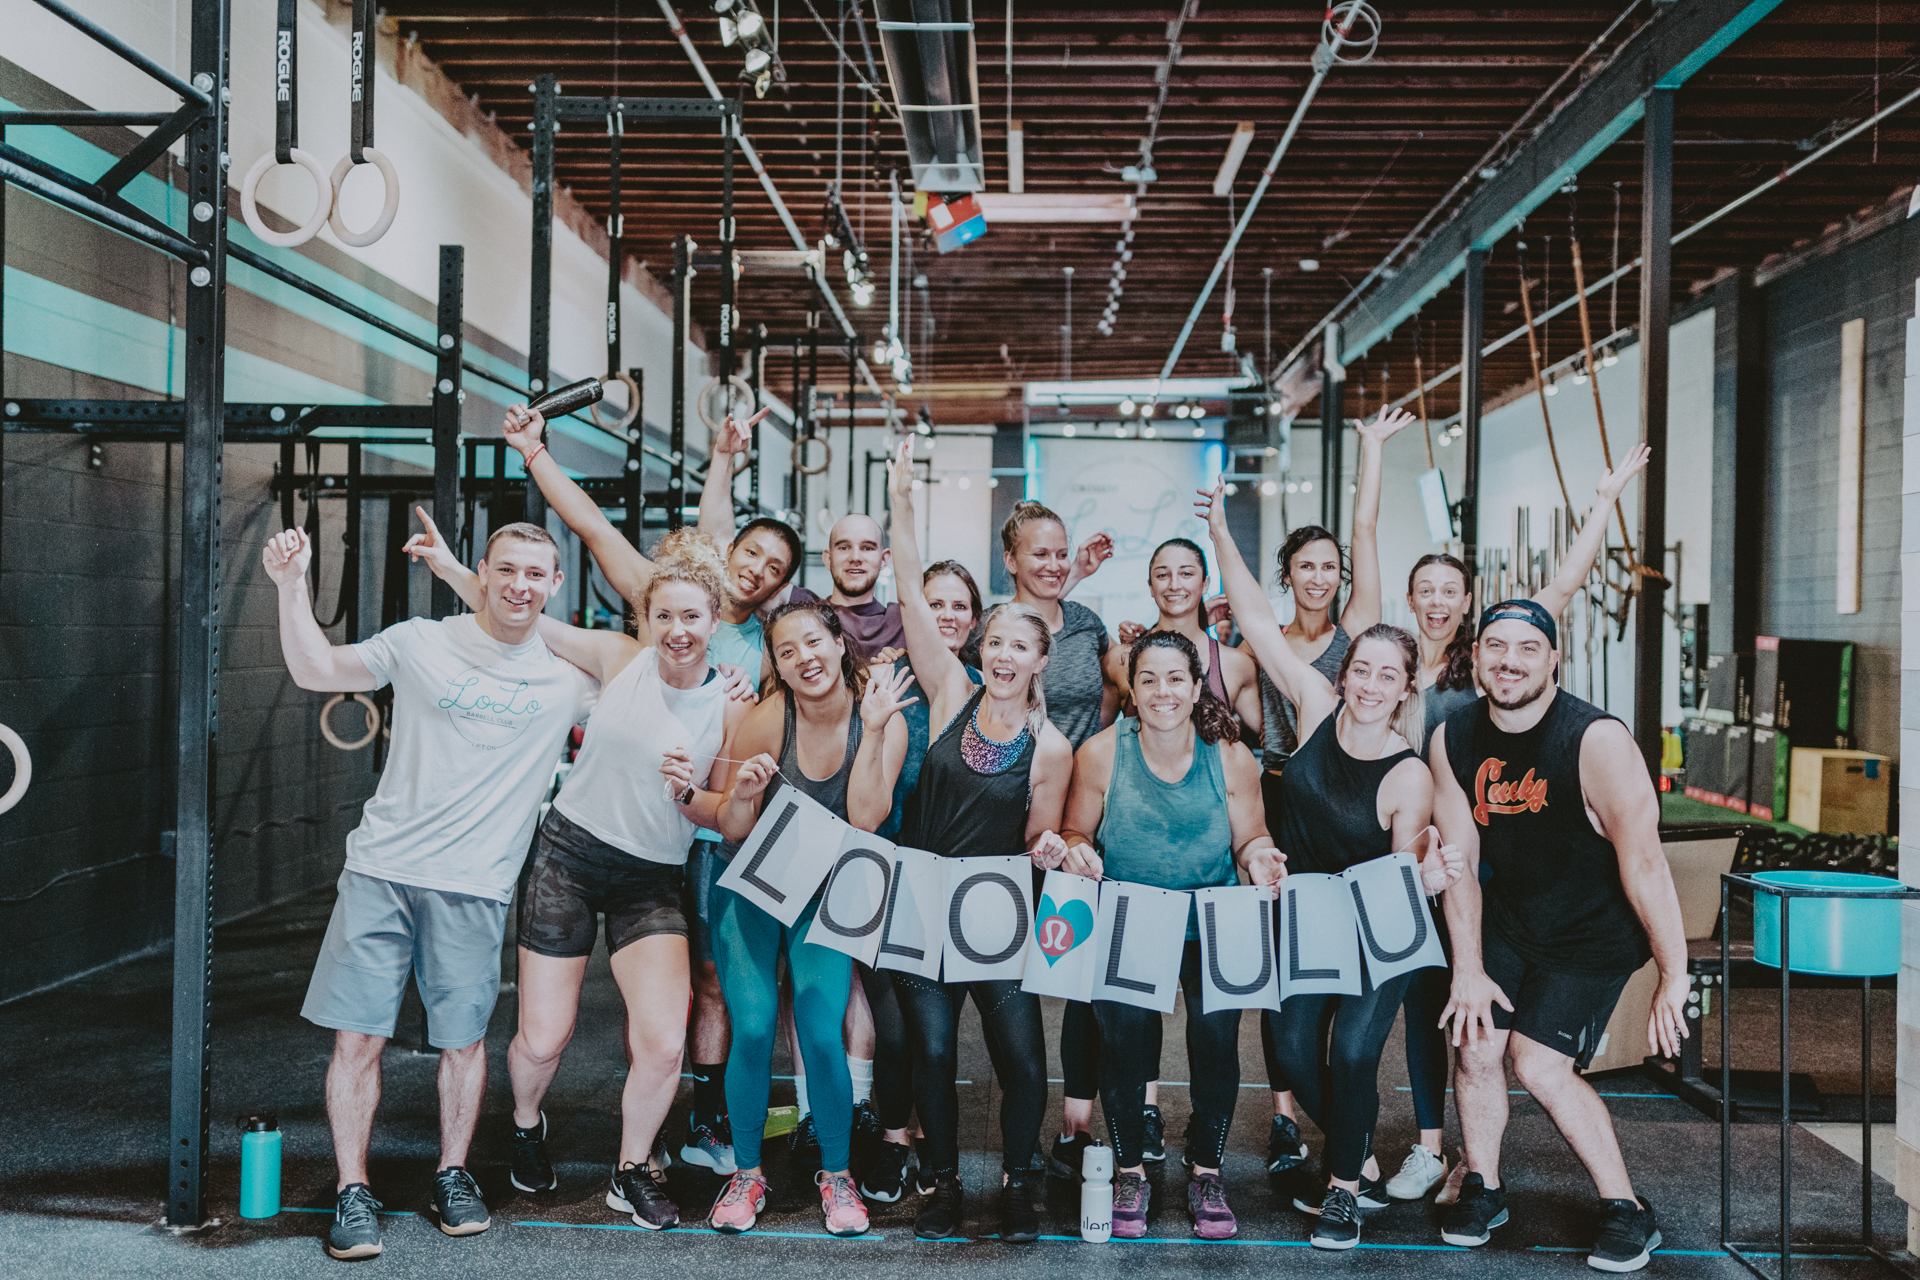 LuLuLemon team participates in a crossfit gym workout in Victoria BC